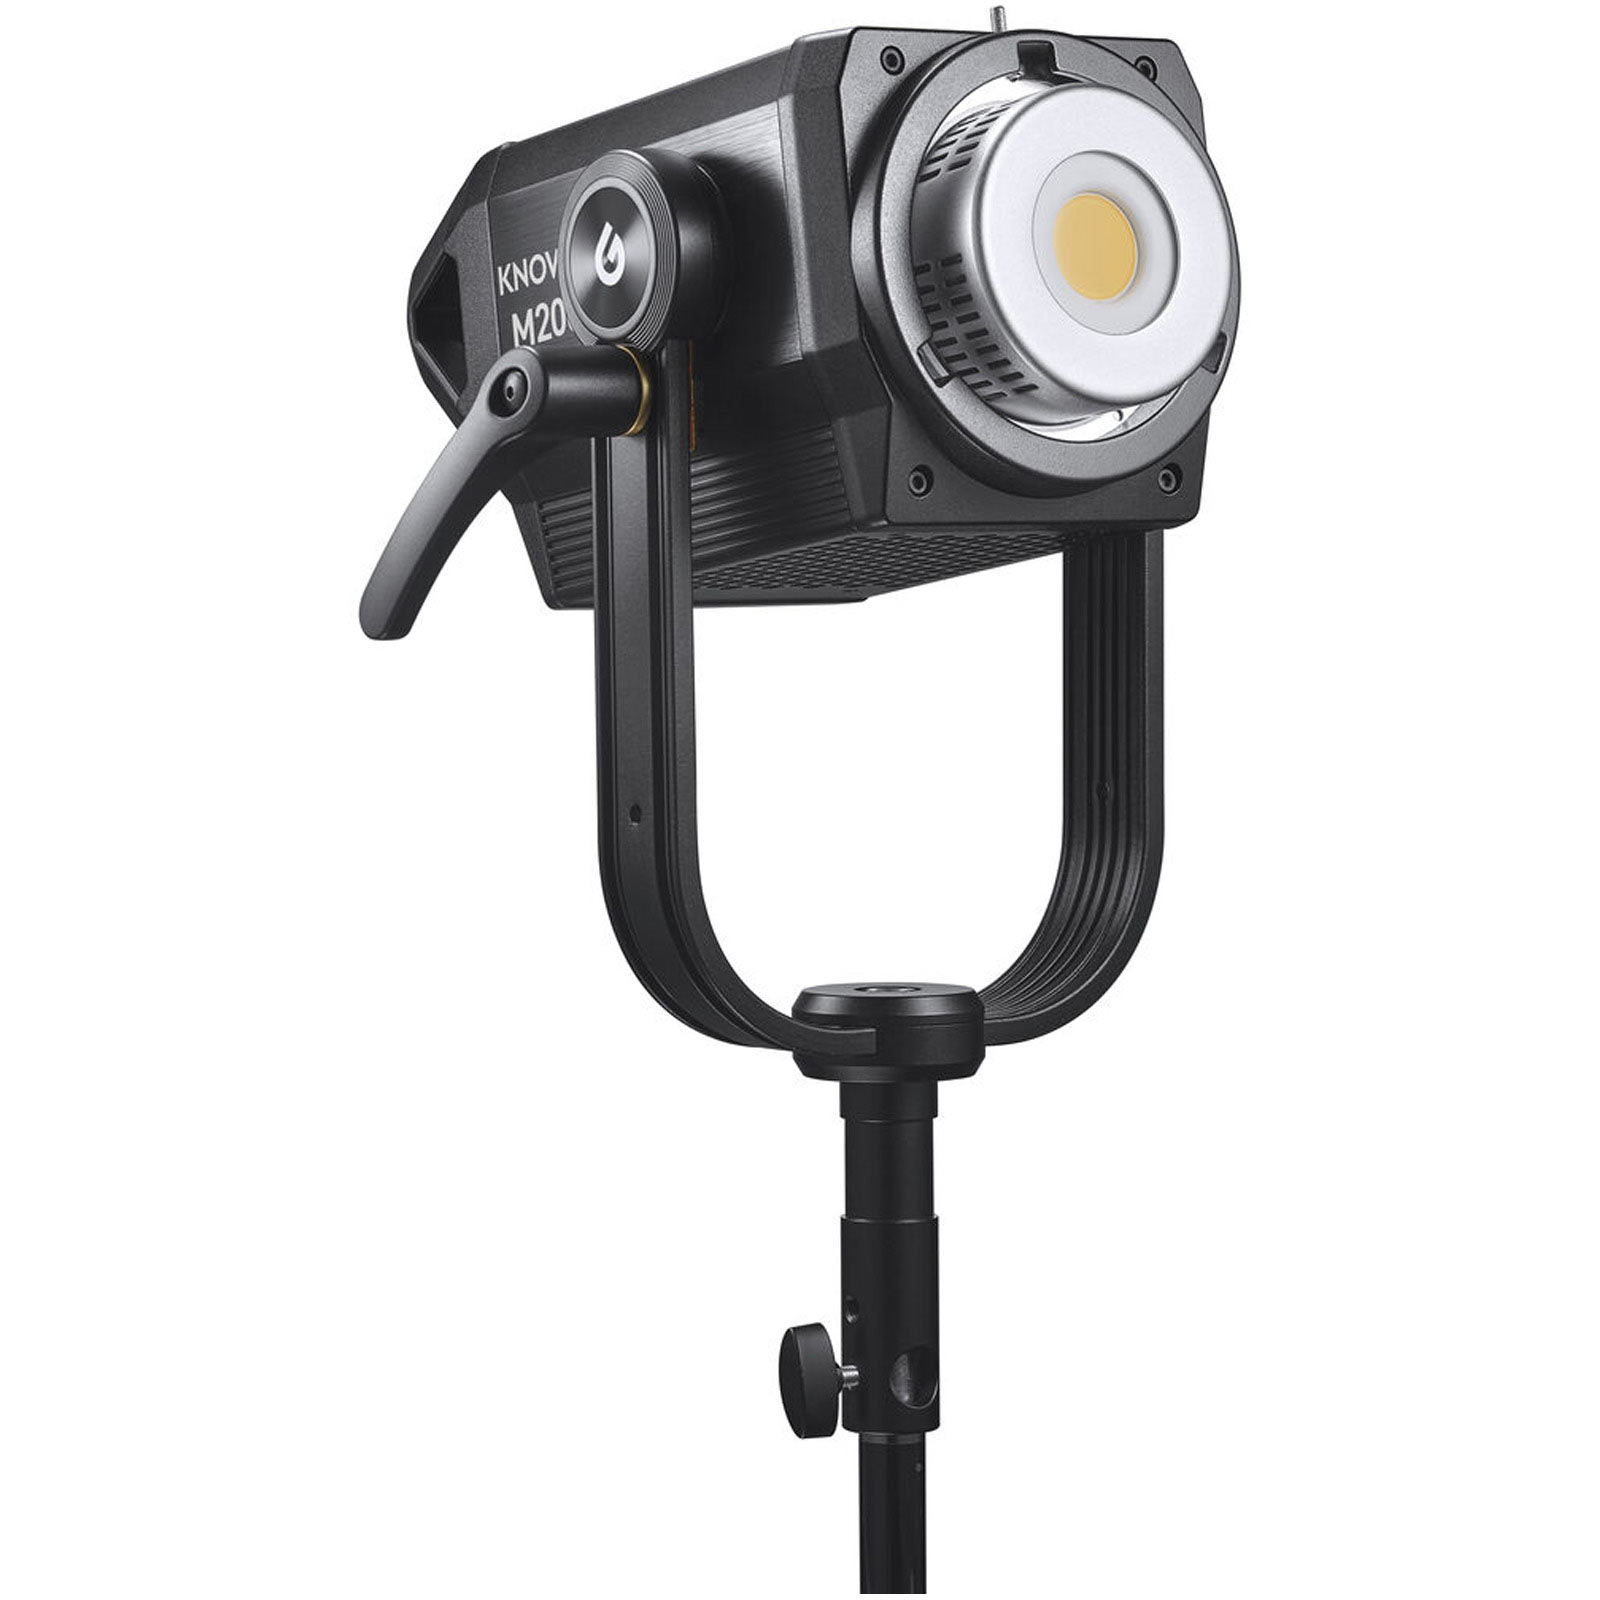 Image of Godox KNOWLED M200D Professional Day Light LED Light